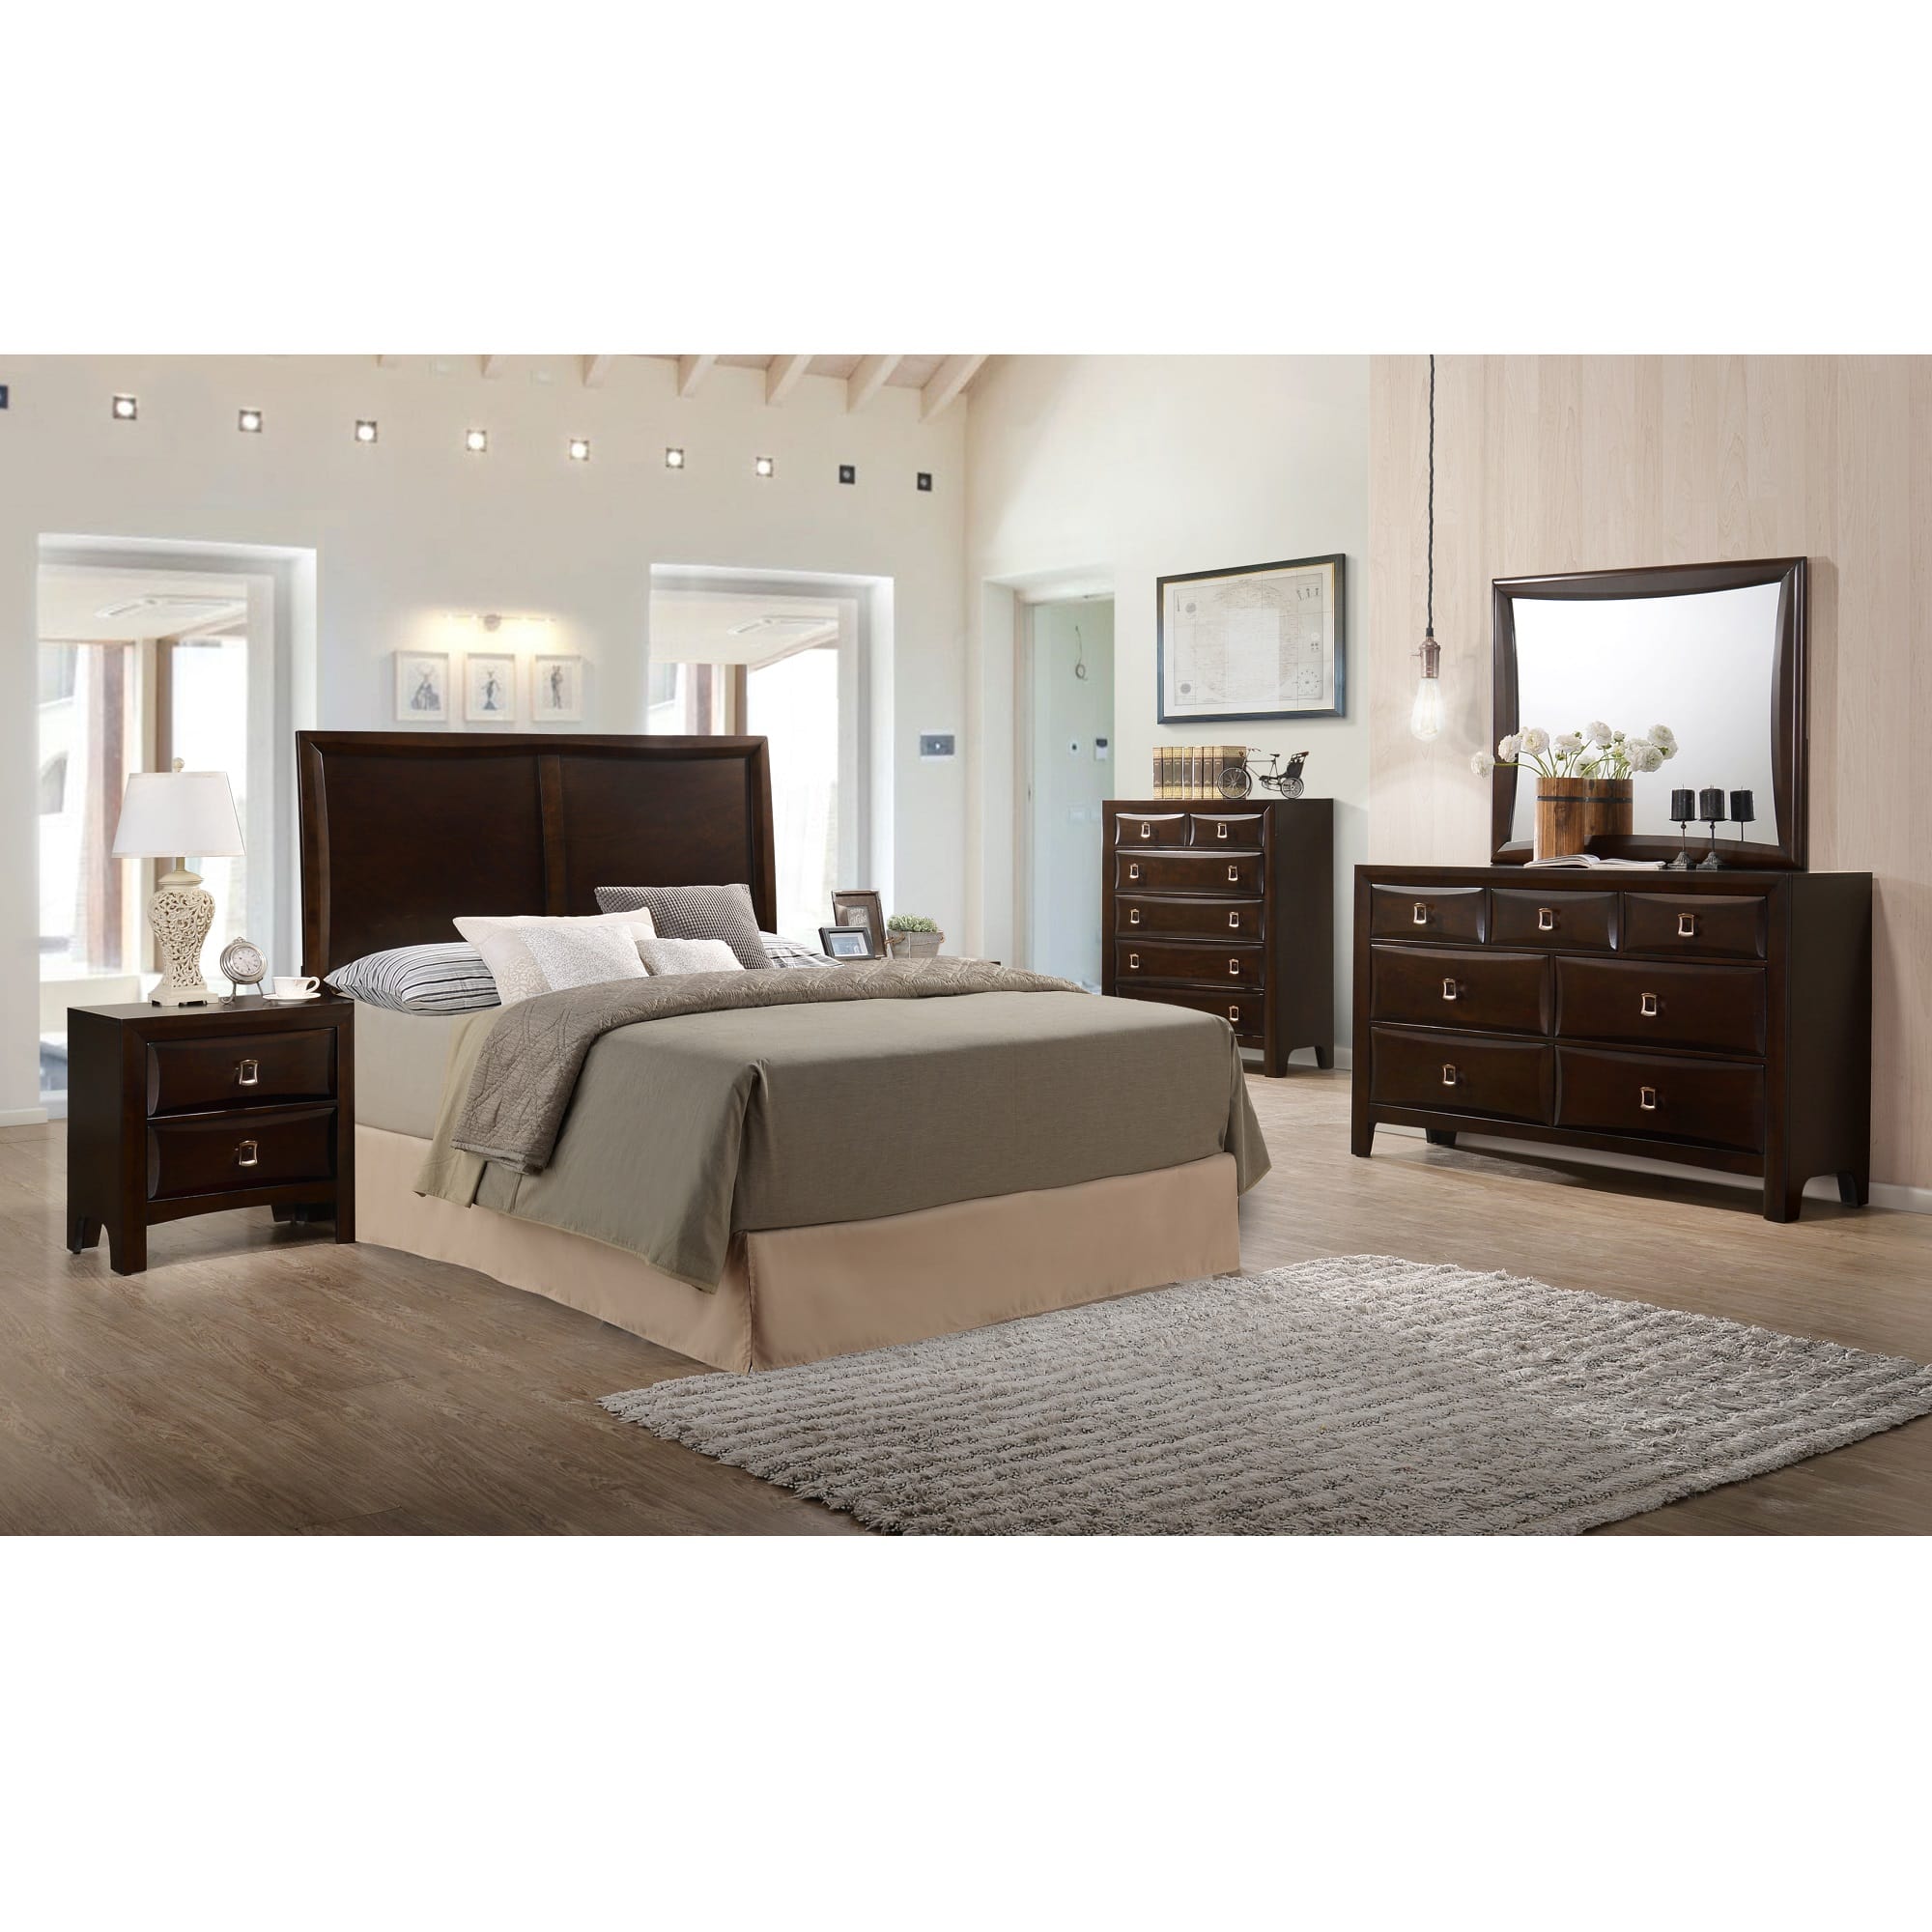 Rent To Own Step One Furniture 10 Piece Franklin Queen Bedroom